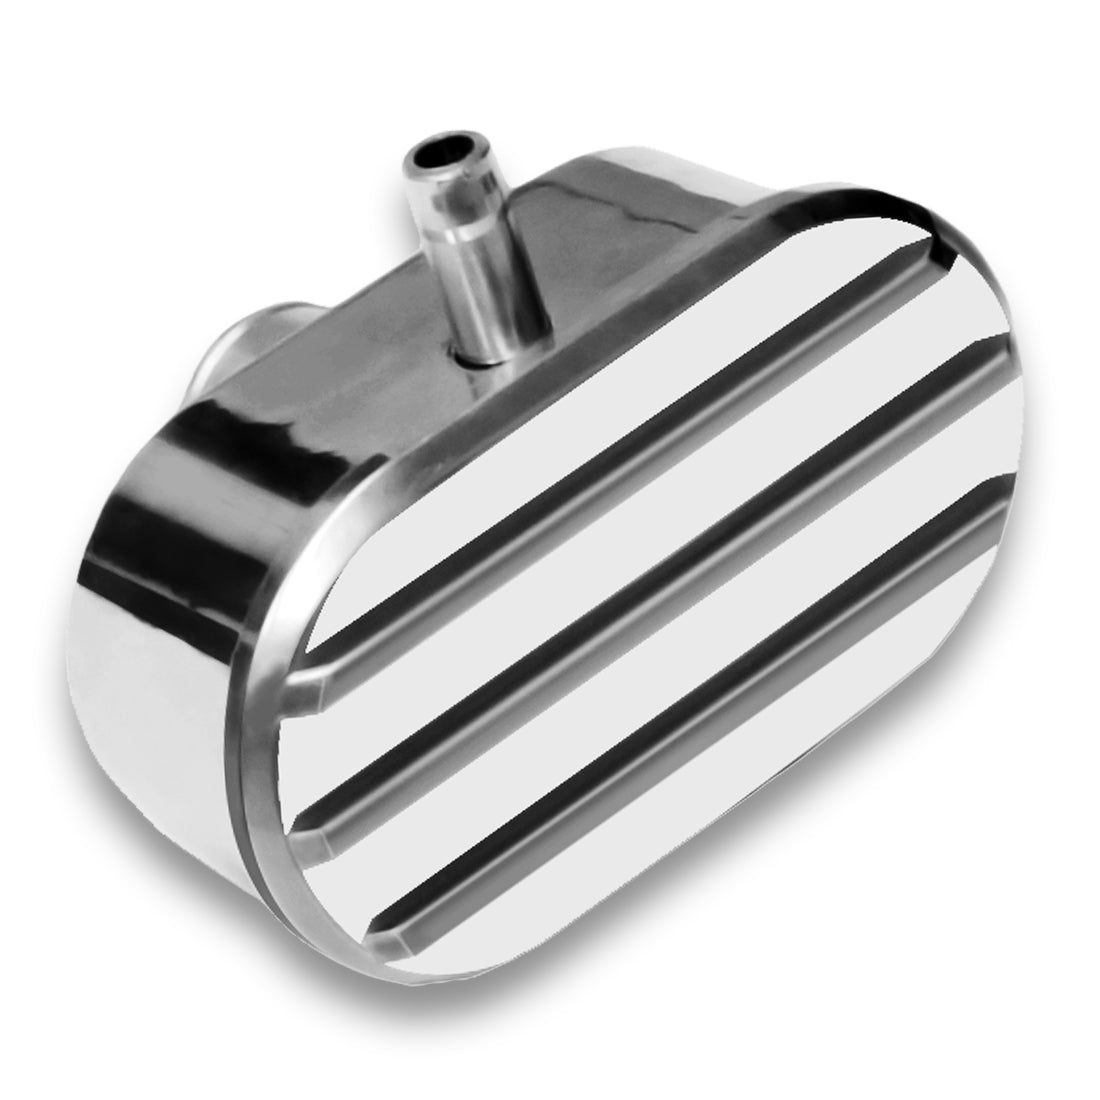 Finned Oval Polished Aluminum Valve Cover Breather Cap With Pcv Notalgic